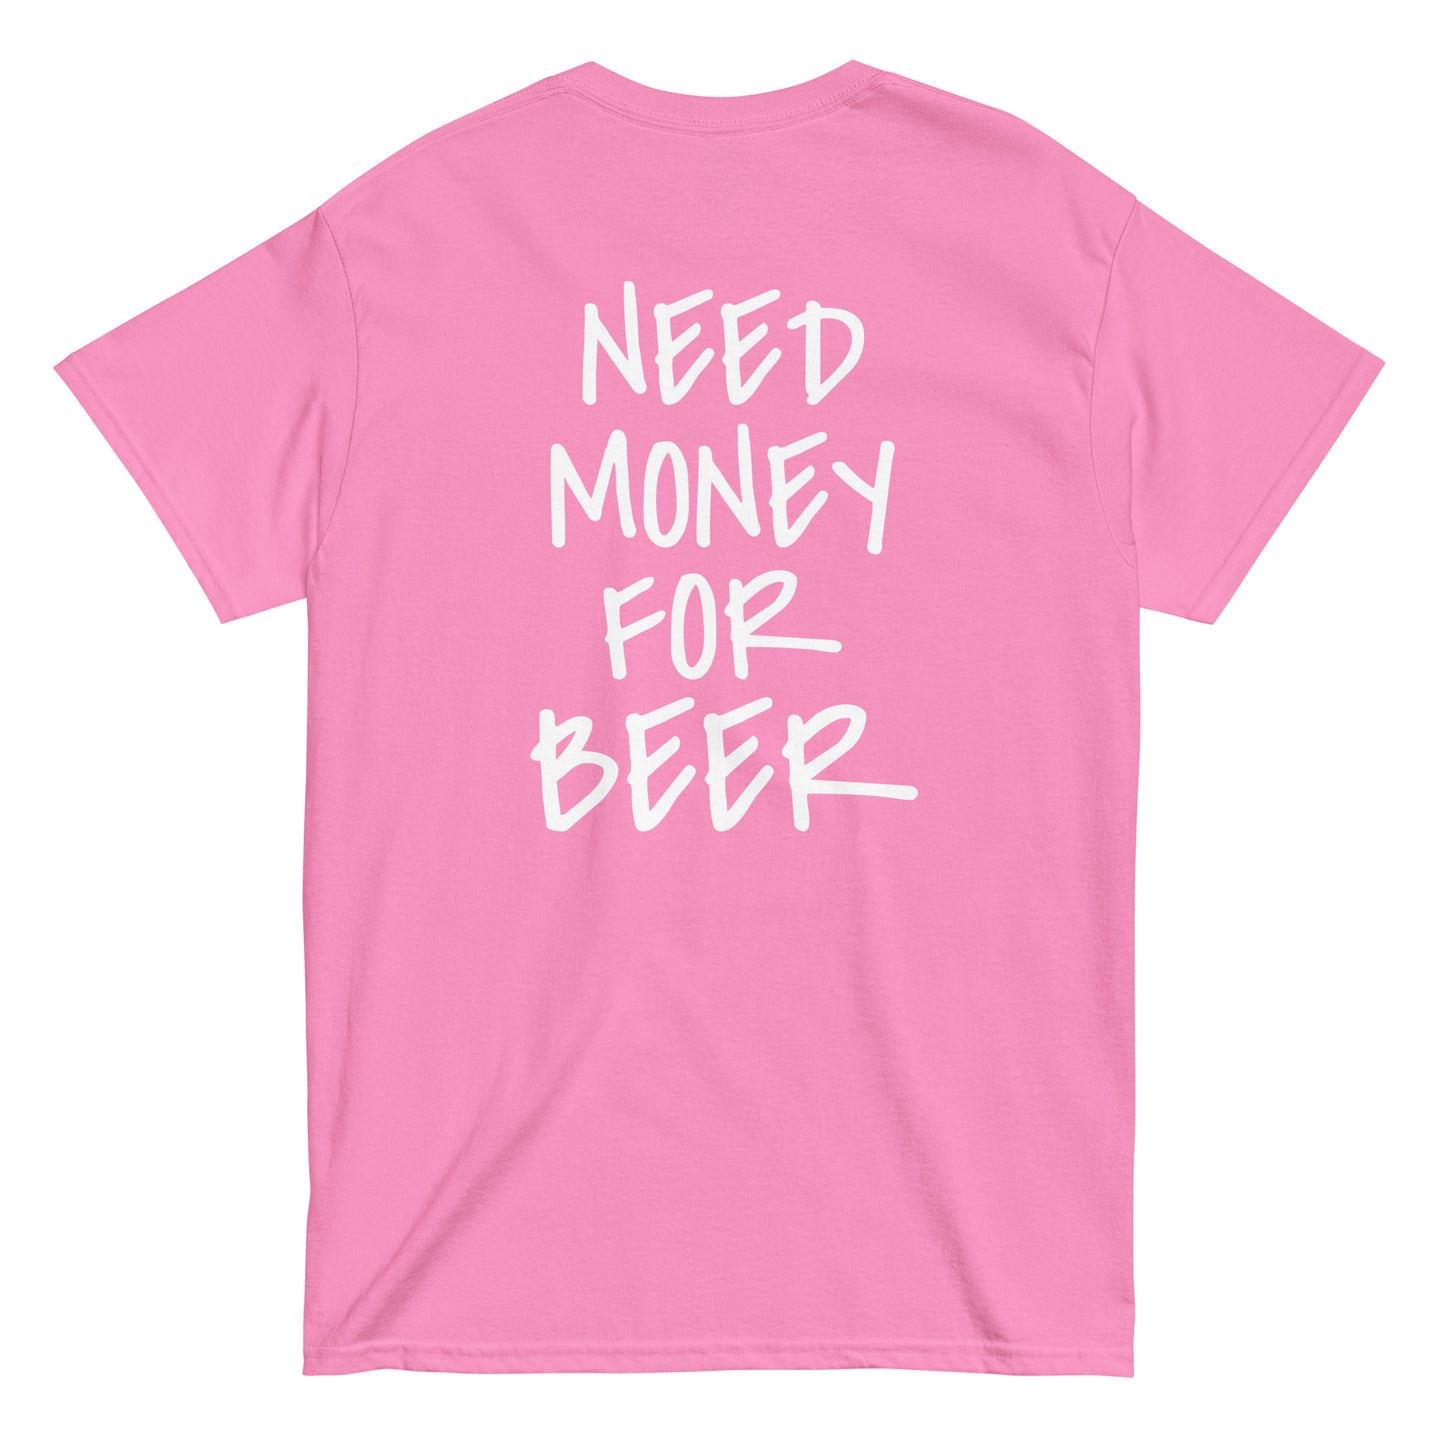 NEED MONEY FOR BEER T-Shirt [BACKPRINT]